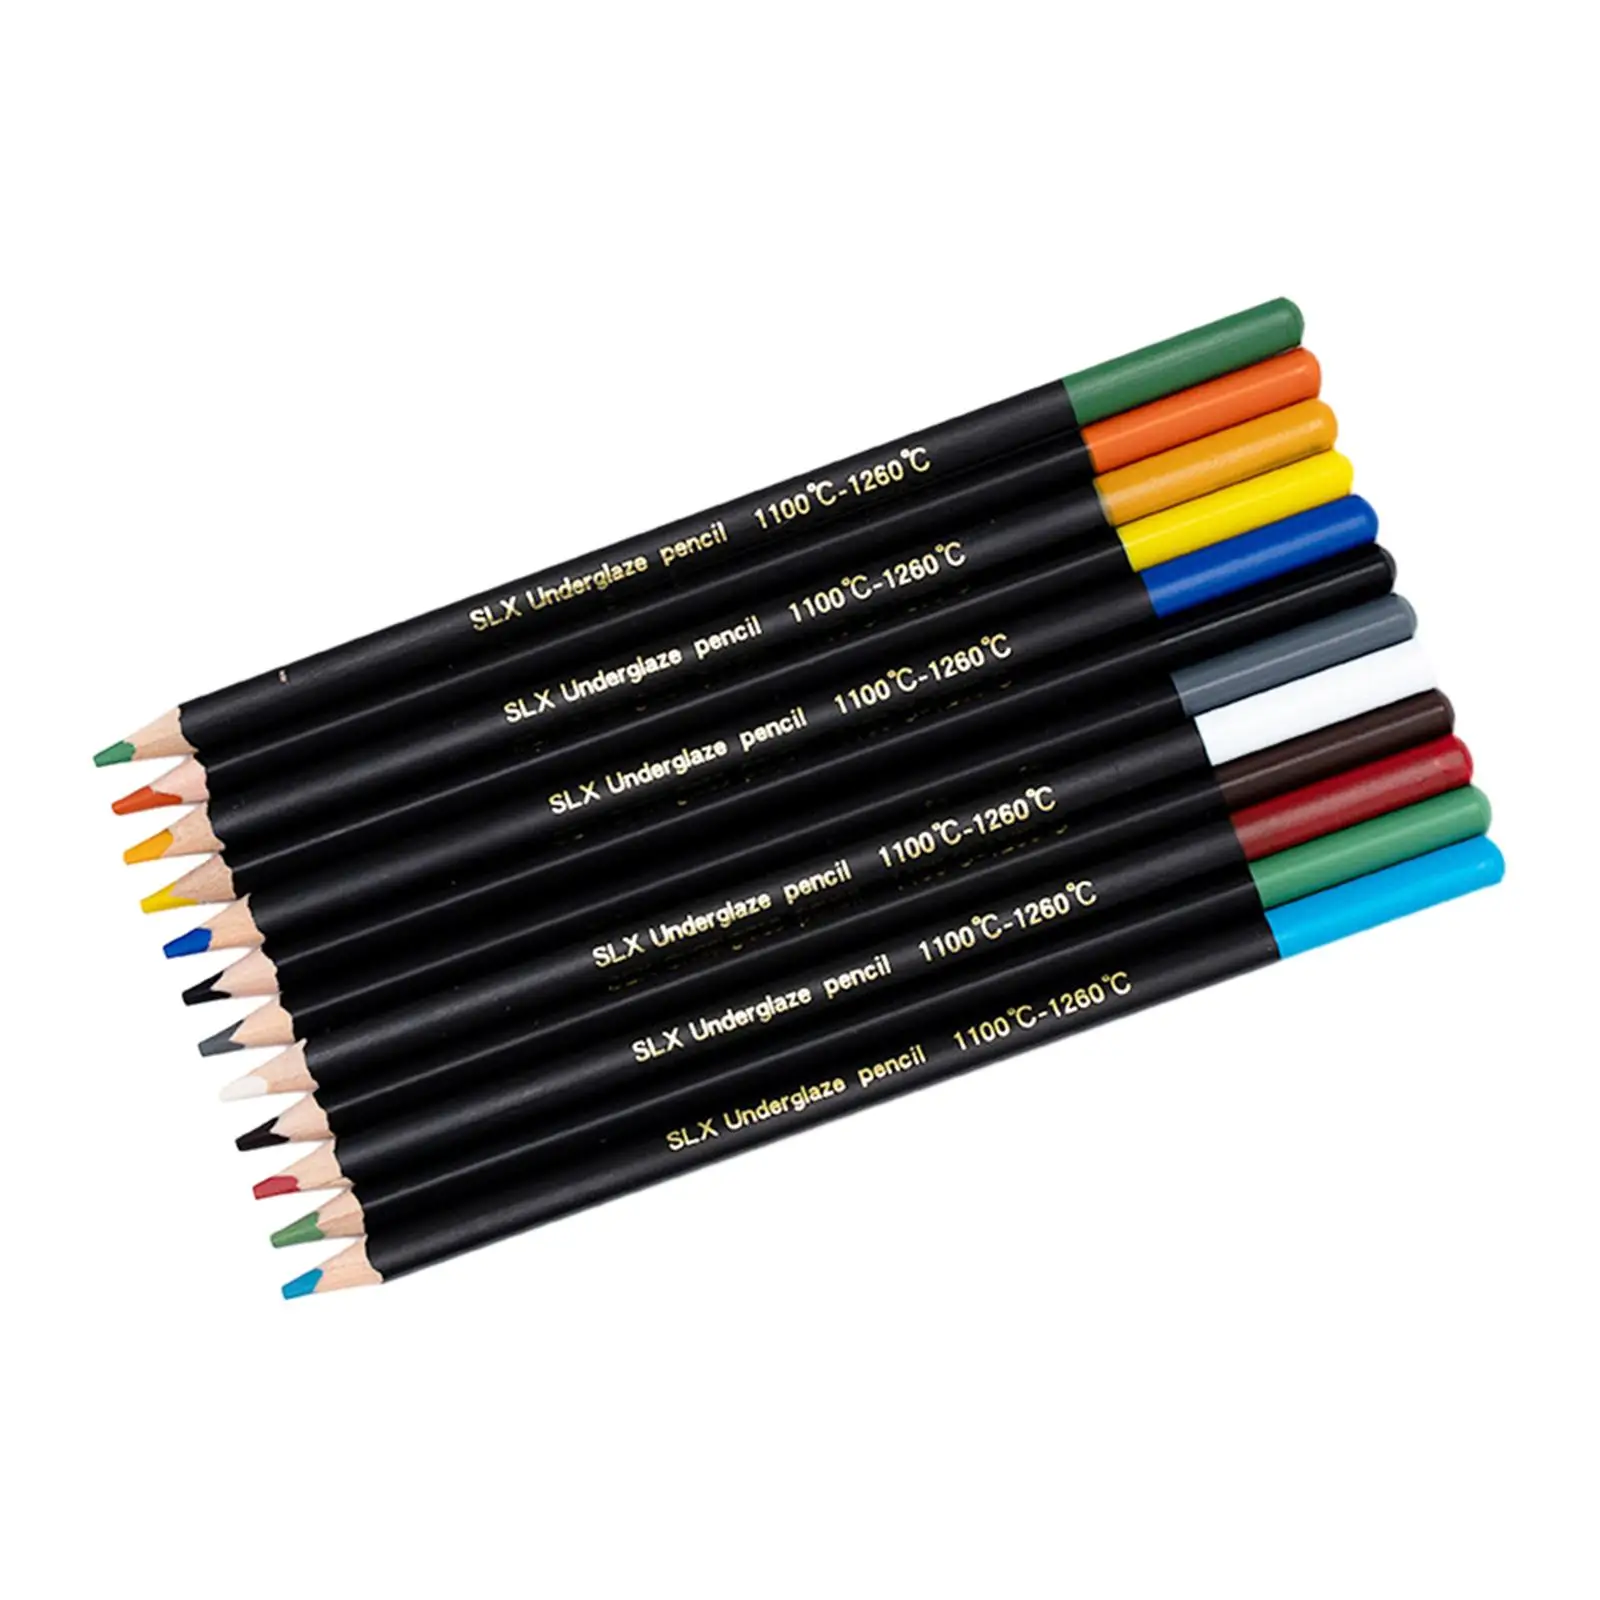 Colored Pencils 12 Colored Drawing Pencils Coloring Pencils Bulk for Art Supplies Artist Sketching Hand Painting Gift